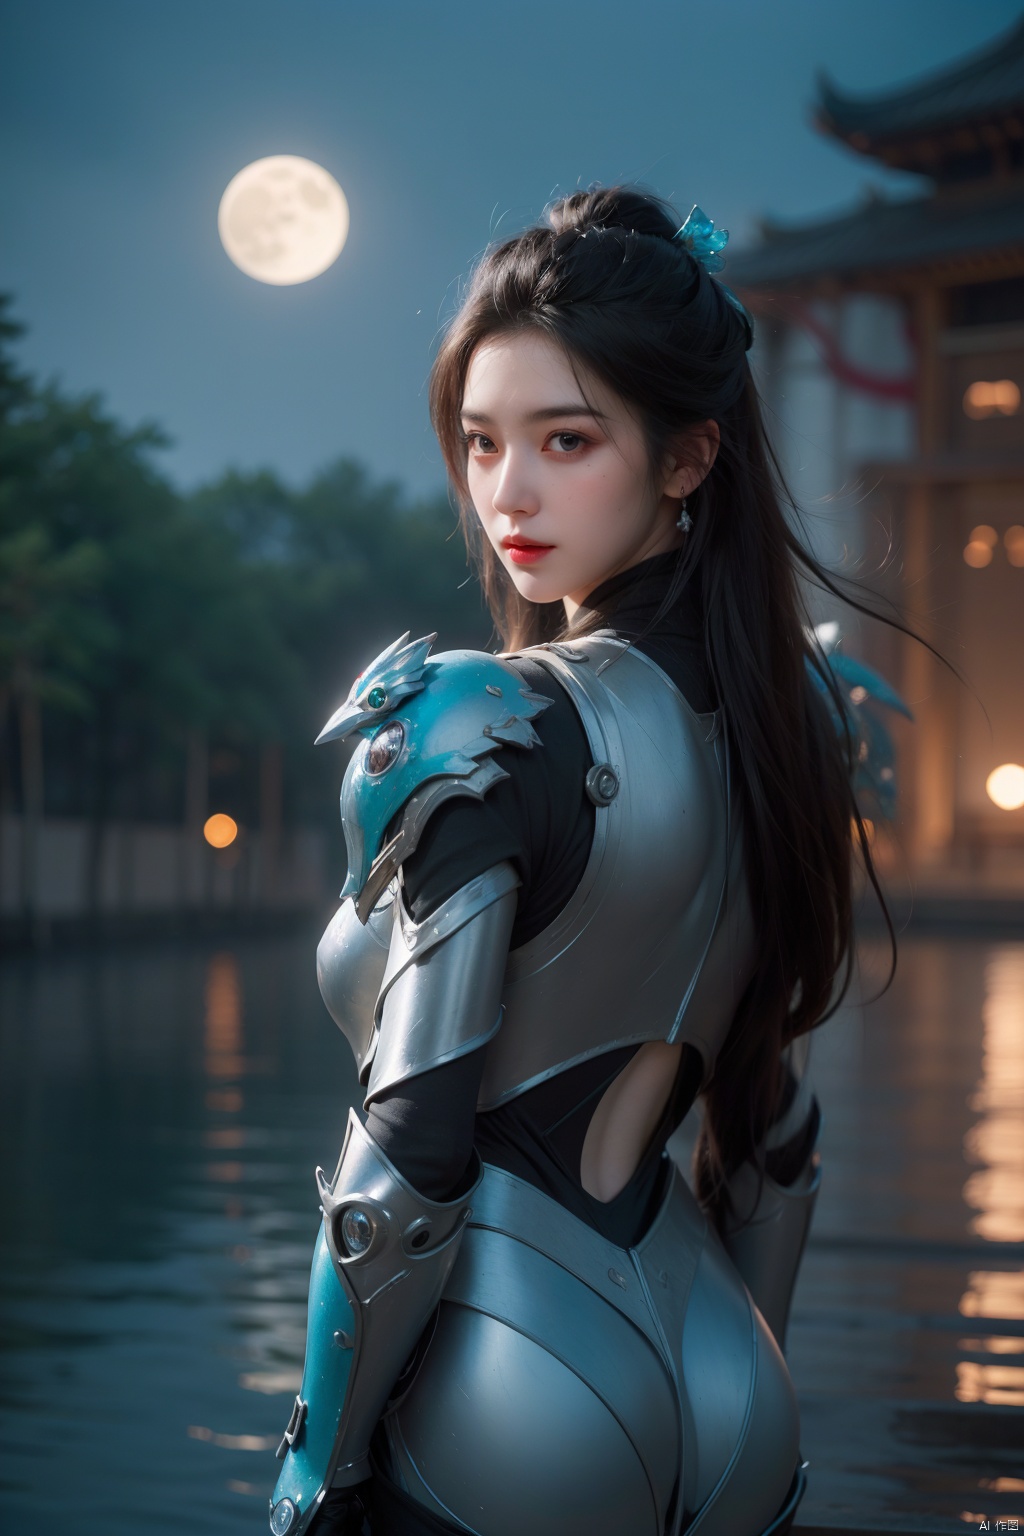 （extremely detailed cg：1.2）, (8k, RAW photo, best quality, masterpiece:1.2), (super realistic, photo-realistic:1.3), ultra-detailed, 4K, 8k wallpaper, hatching (texture), skin gloss, light persona, (crystalstexture skin:1.2), (extremely delicate and beautiful), ultra-high resolution, (photo realistic: 1.4),Up close, upper body, backlit,

Surrealism, Fantastical verisimilitude, beautiful blue-skinned goddess Phoenix Peacock on her head, fantastical creation, thriller color scheme, surrealism, abstract, psychedelic,
1 girl, (warrior, battle suit:1.3), (moon), moonlight, water surface, long hair, windy, qingyi, ll-hd, pf-hd, ty-hd,  EPICARMOR2024